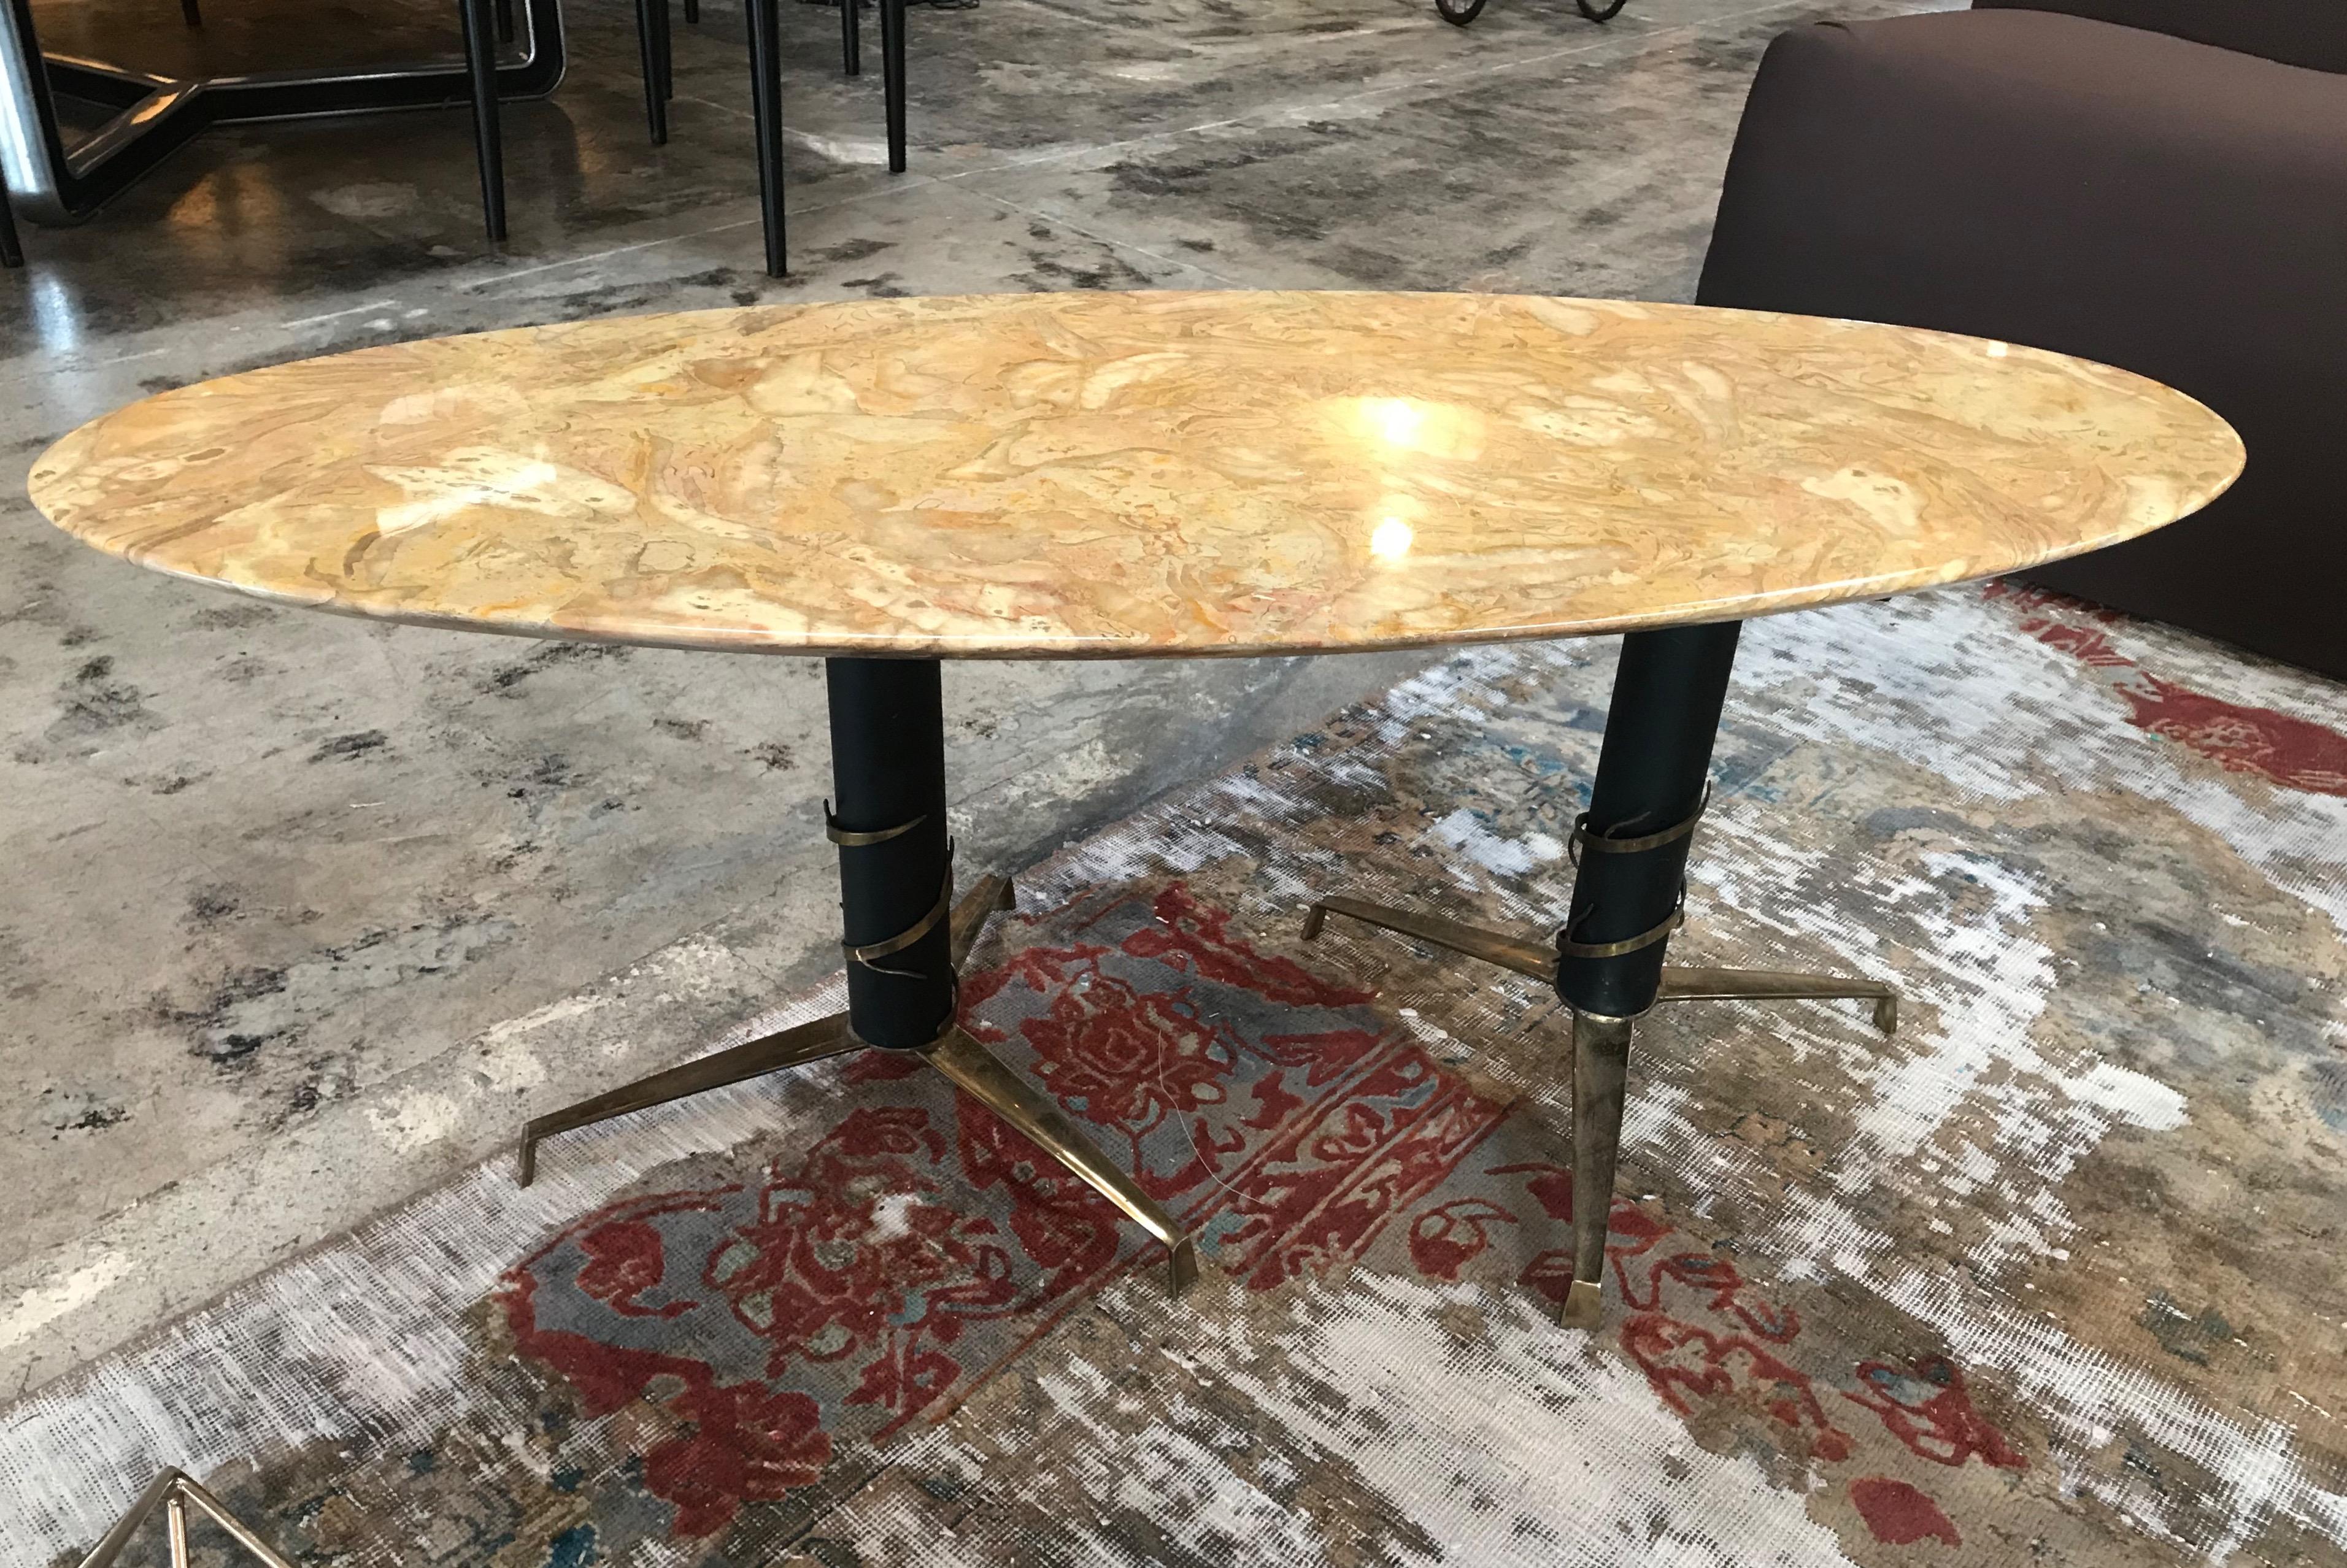 Mid-Century Modern Italian yellow marble and brass oval coffee table, 1950
Brass in original patina create a vibrant vintage look. Marble is in perfect conditions.